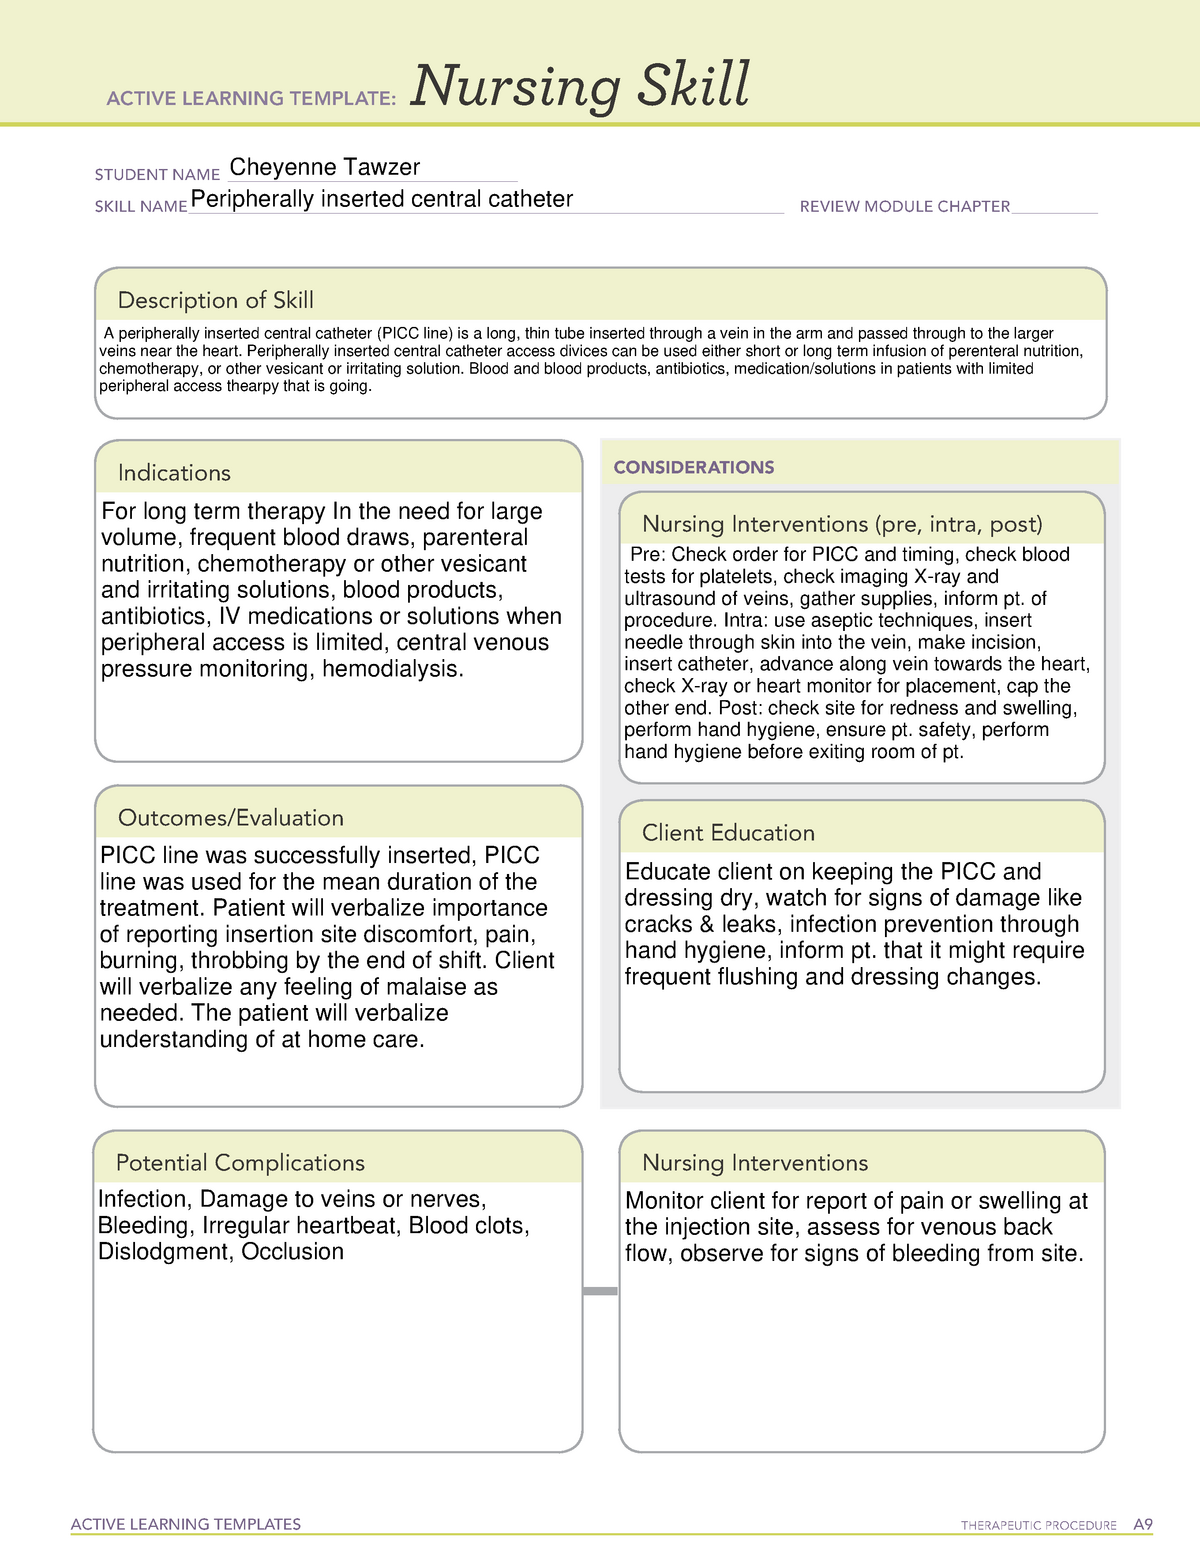 ati-nursing-skill-template-picc-line-active-learning-templates